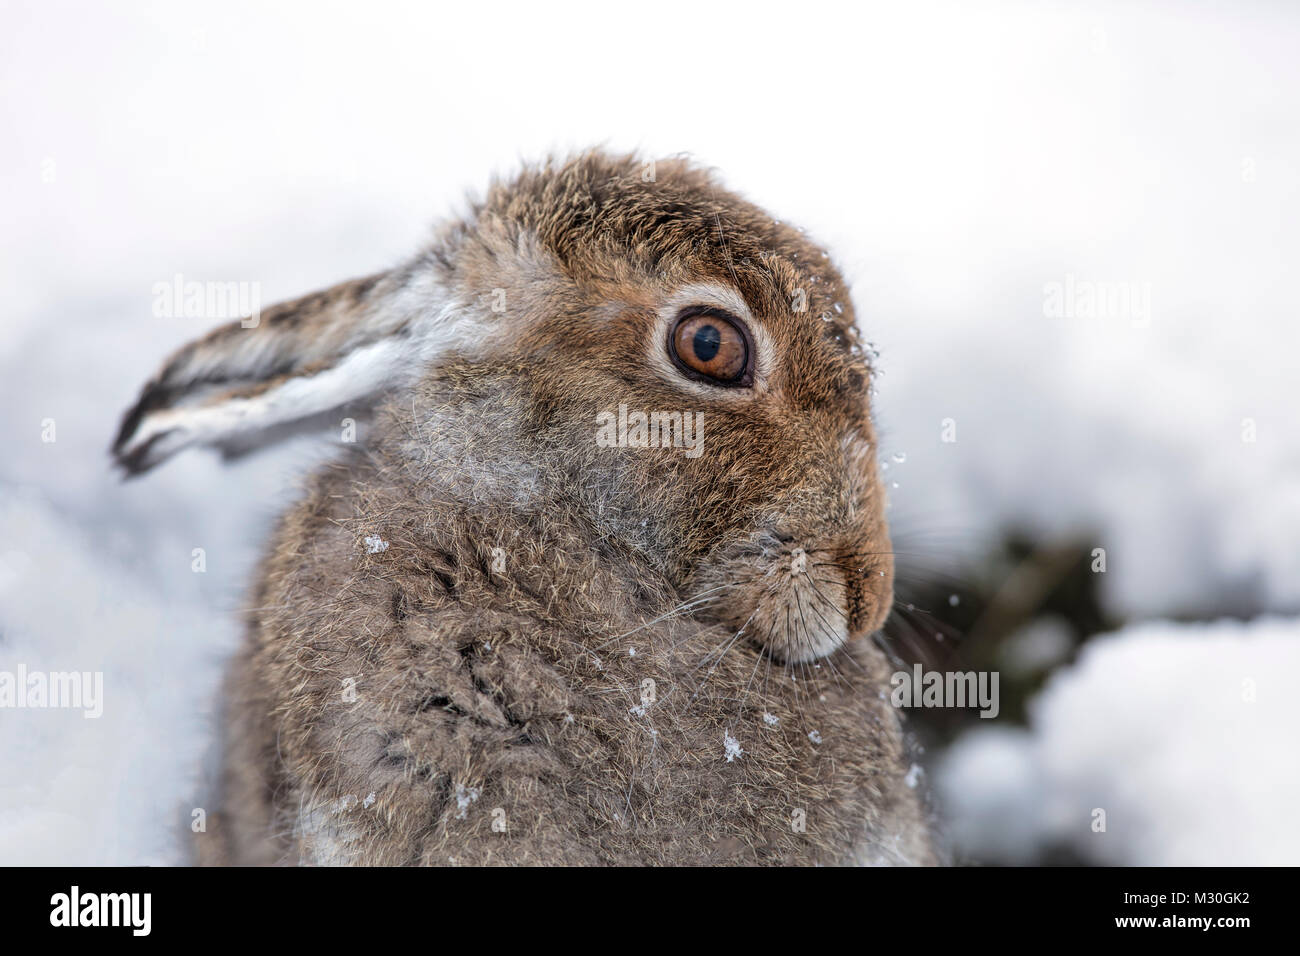 Cute mountain hare looking coy, close up Stock Photo